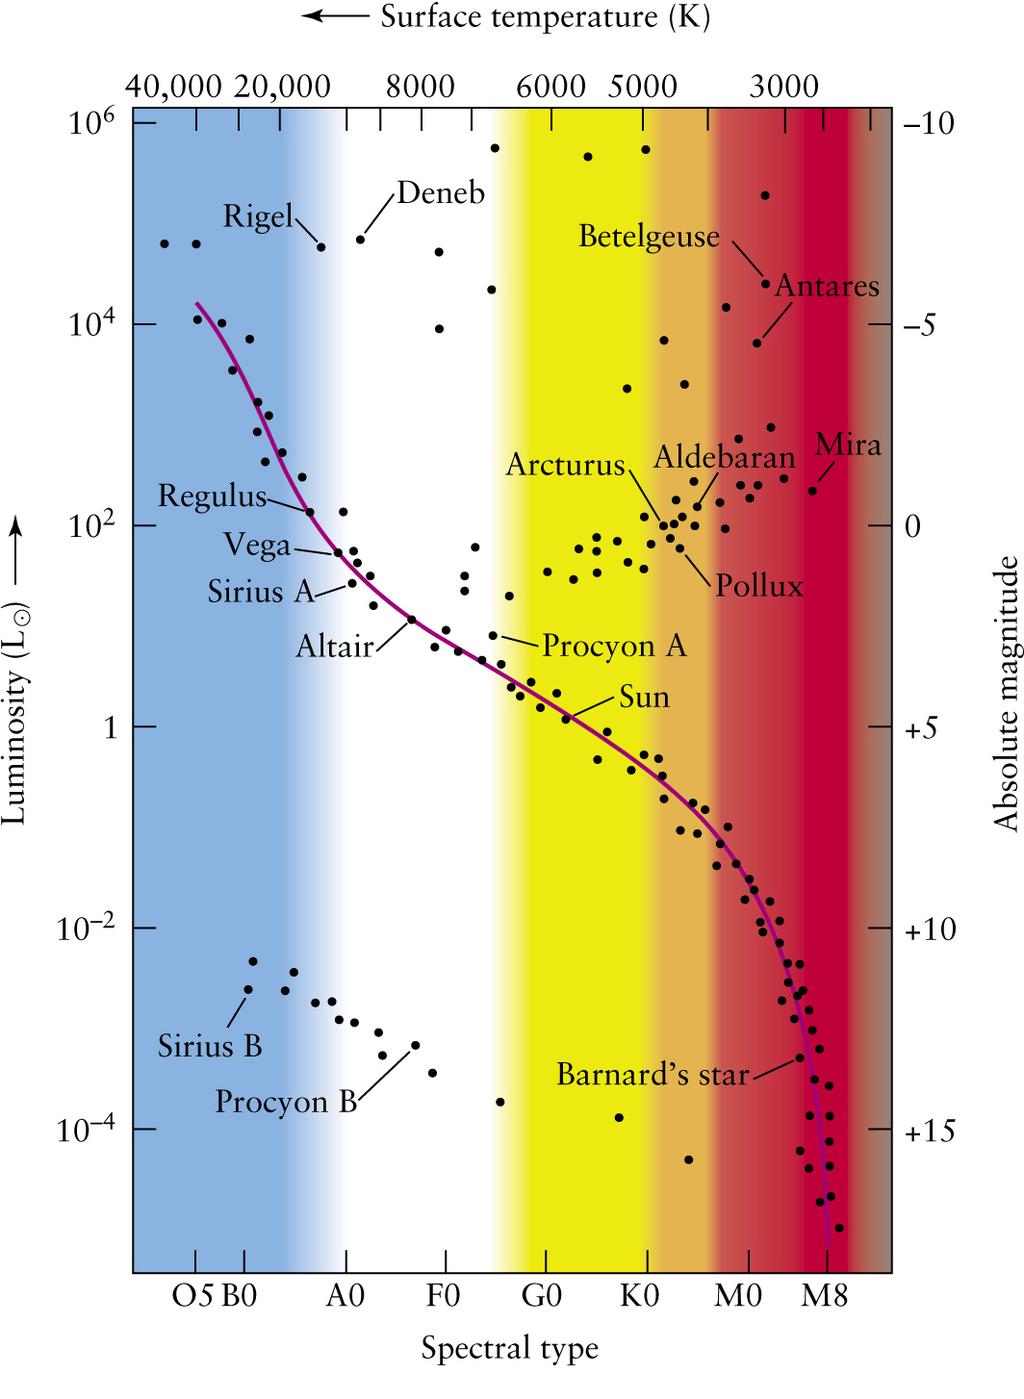 Hertzsprung-Russell Diagram Luminosities of stars are plotted against their spectral types Main-sequence stars fall